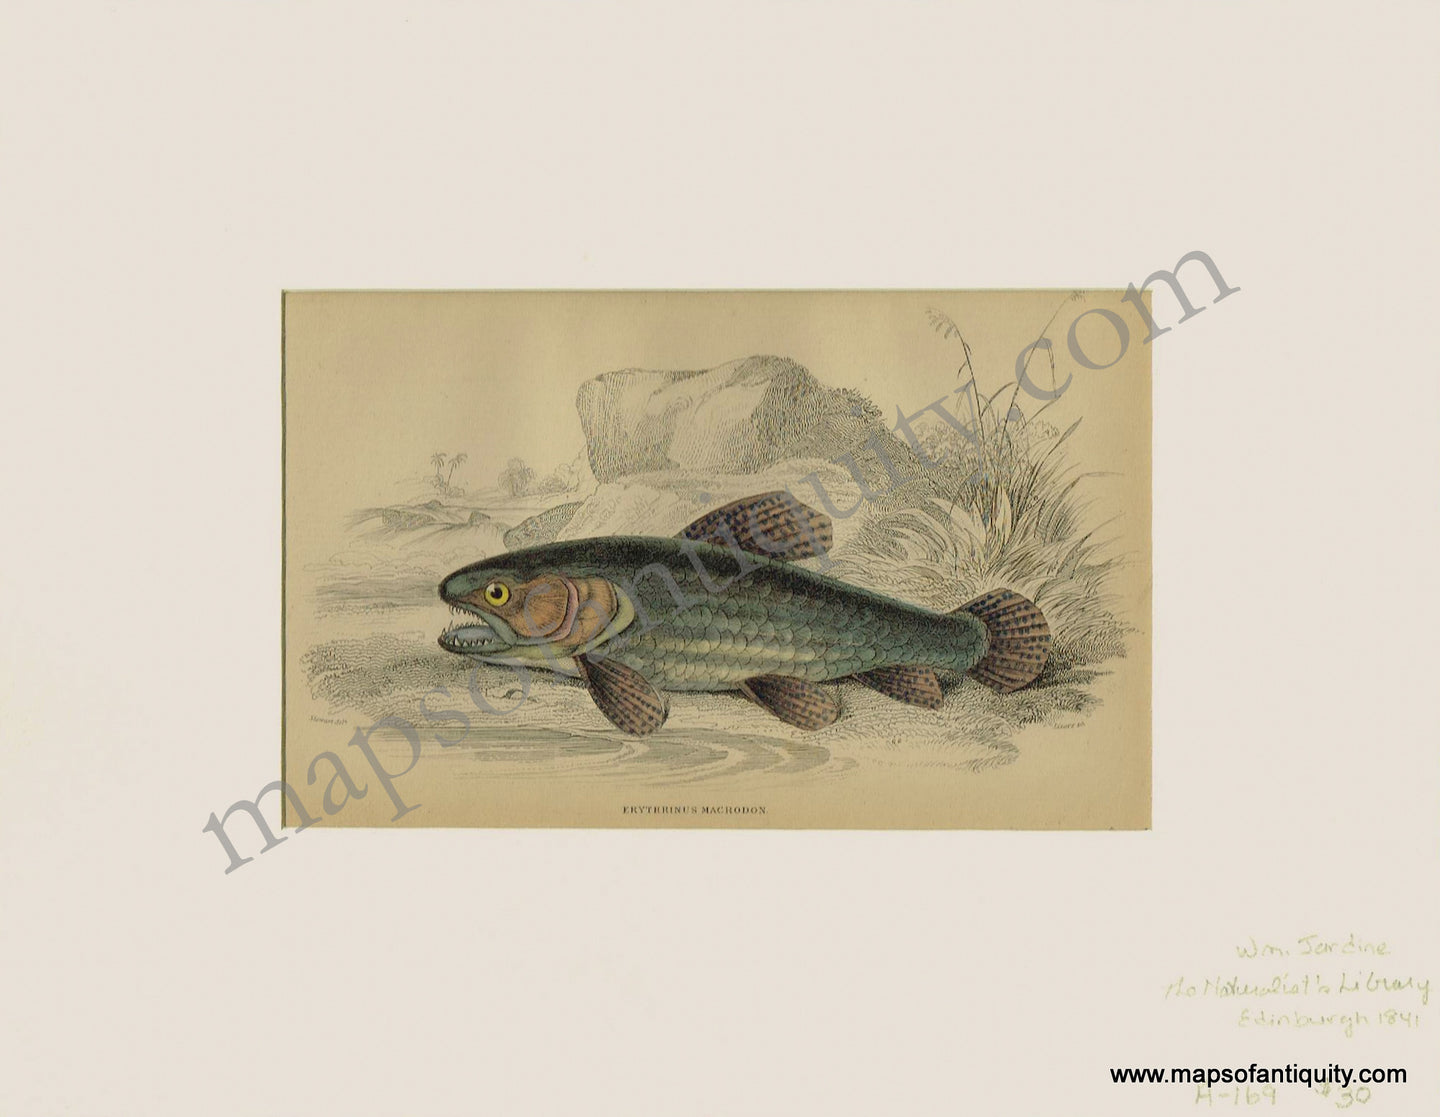 Antique-Print-Prints-Illustration-Illustrations-Engraved-Engraving-Engravings-Natural-History-Diagram-Diagrams-Marine-Fish-Fishing-Erythrinus-Macrodon-The-Haimura-Sea-Aquatic-Naturalist's-Library-Jardine-1841-1840s-1800s-Early-Mid-19th-Century-Maps-of-Antiquity